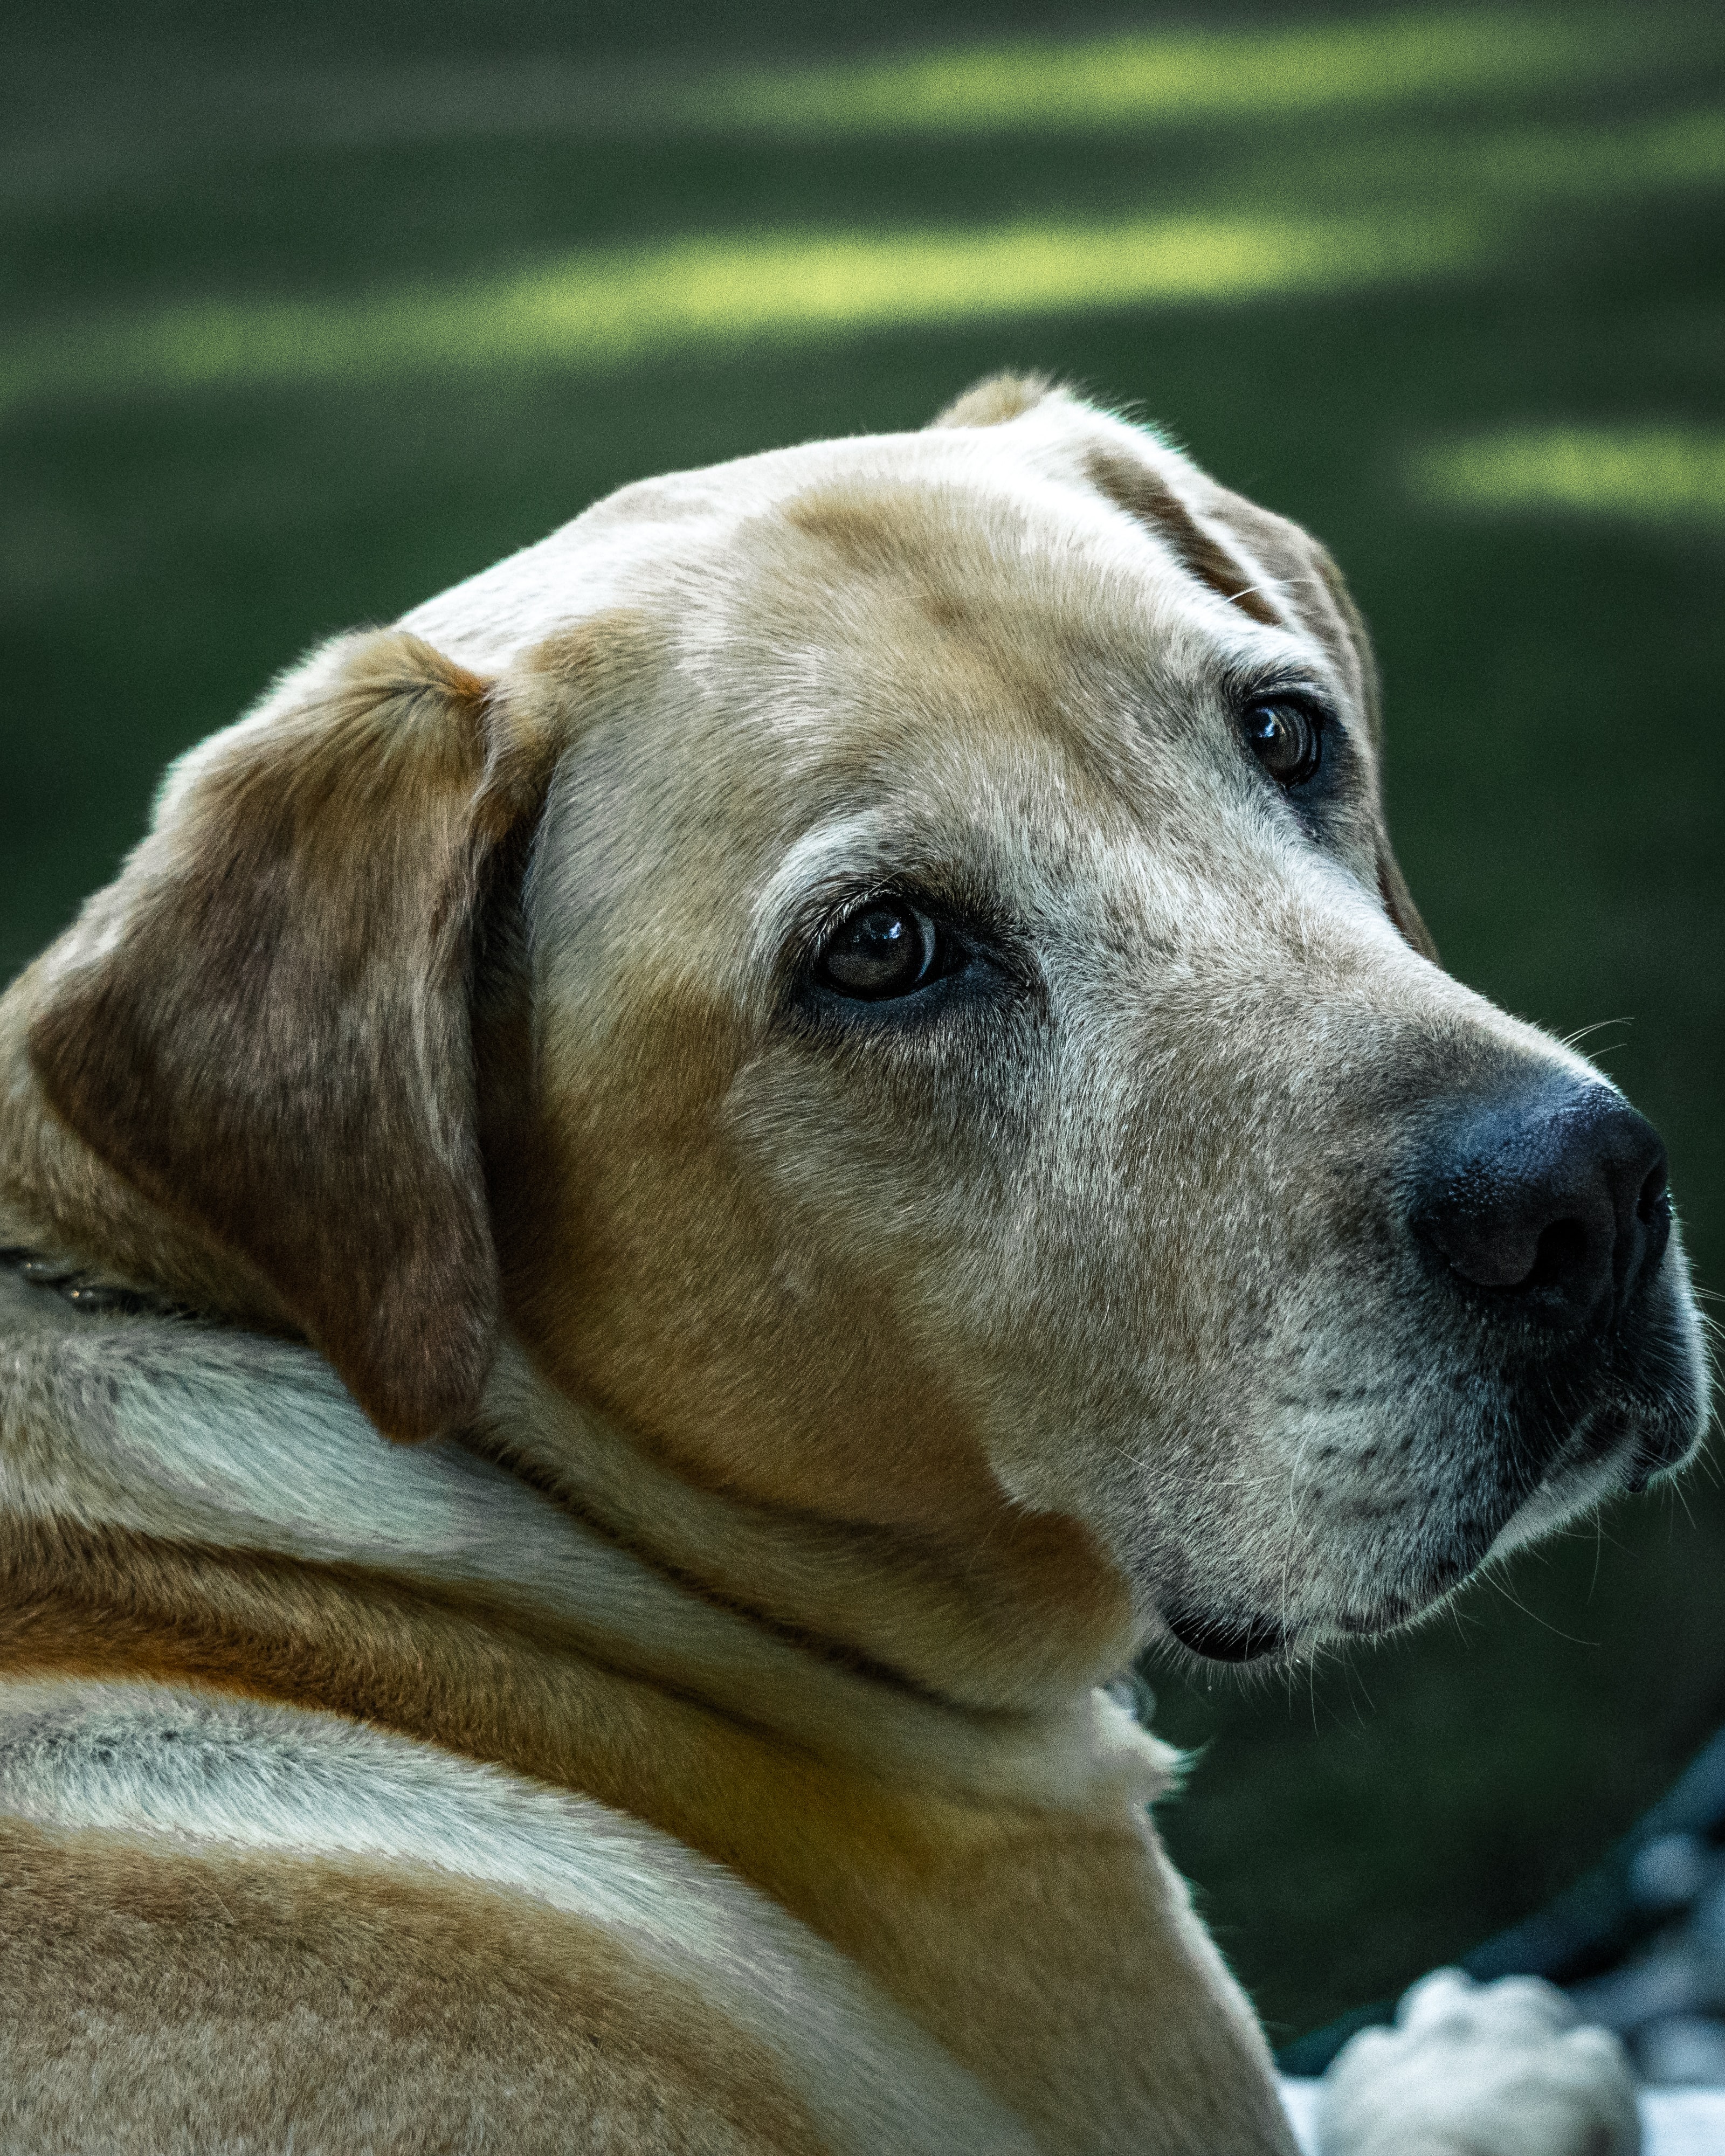 An older yellow lab looks over its shoulder at the camera.